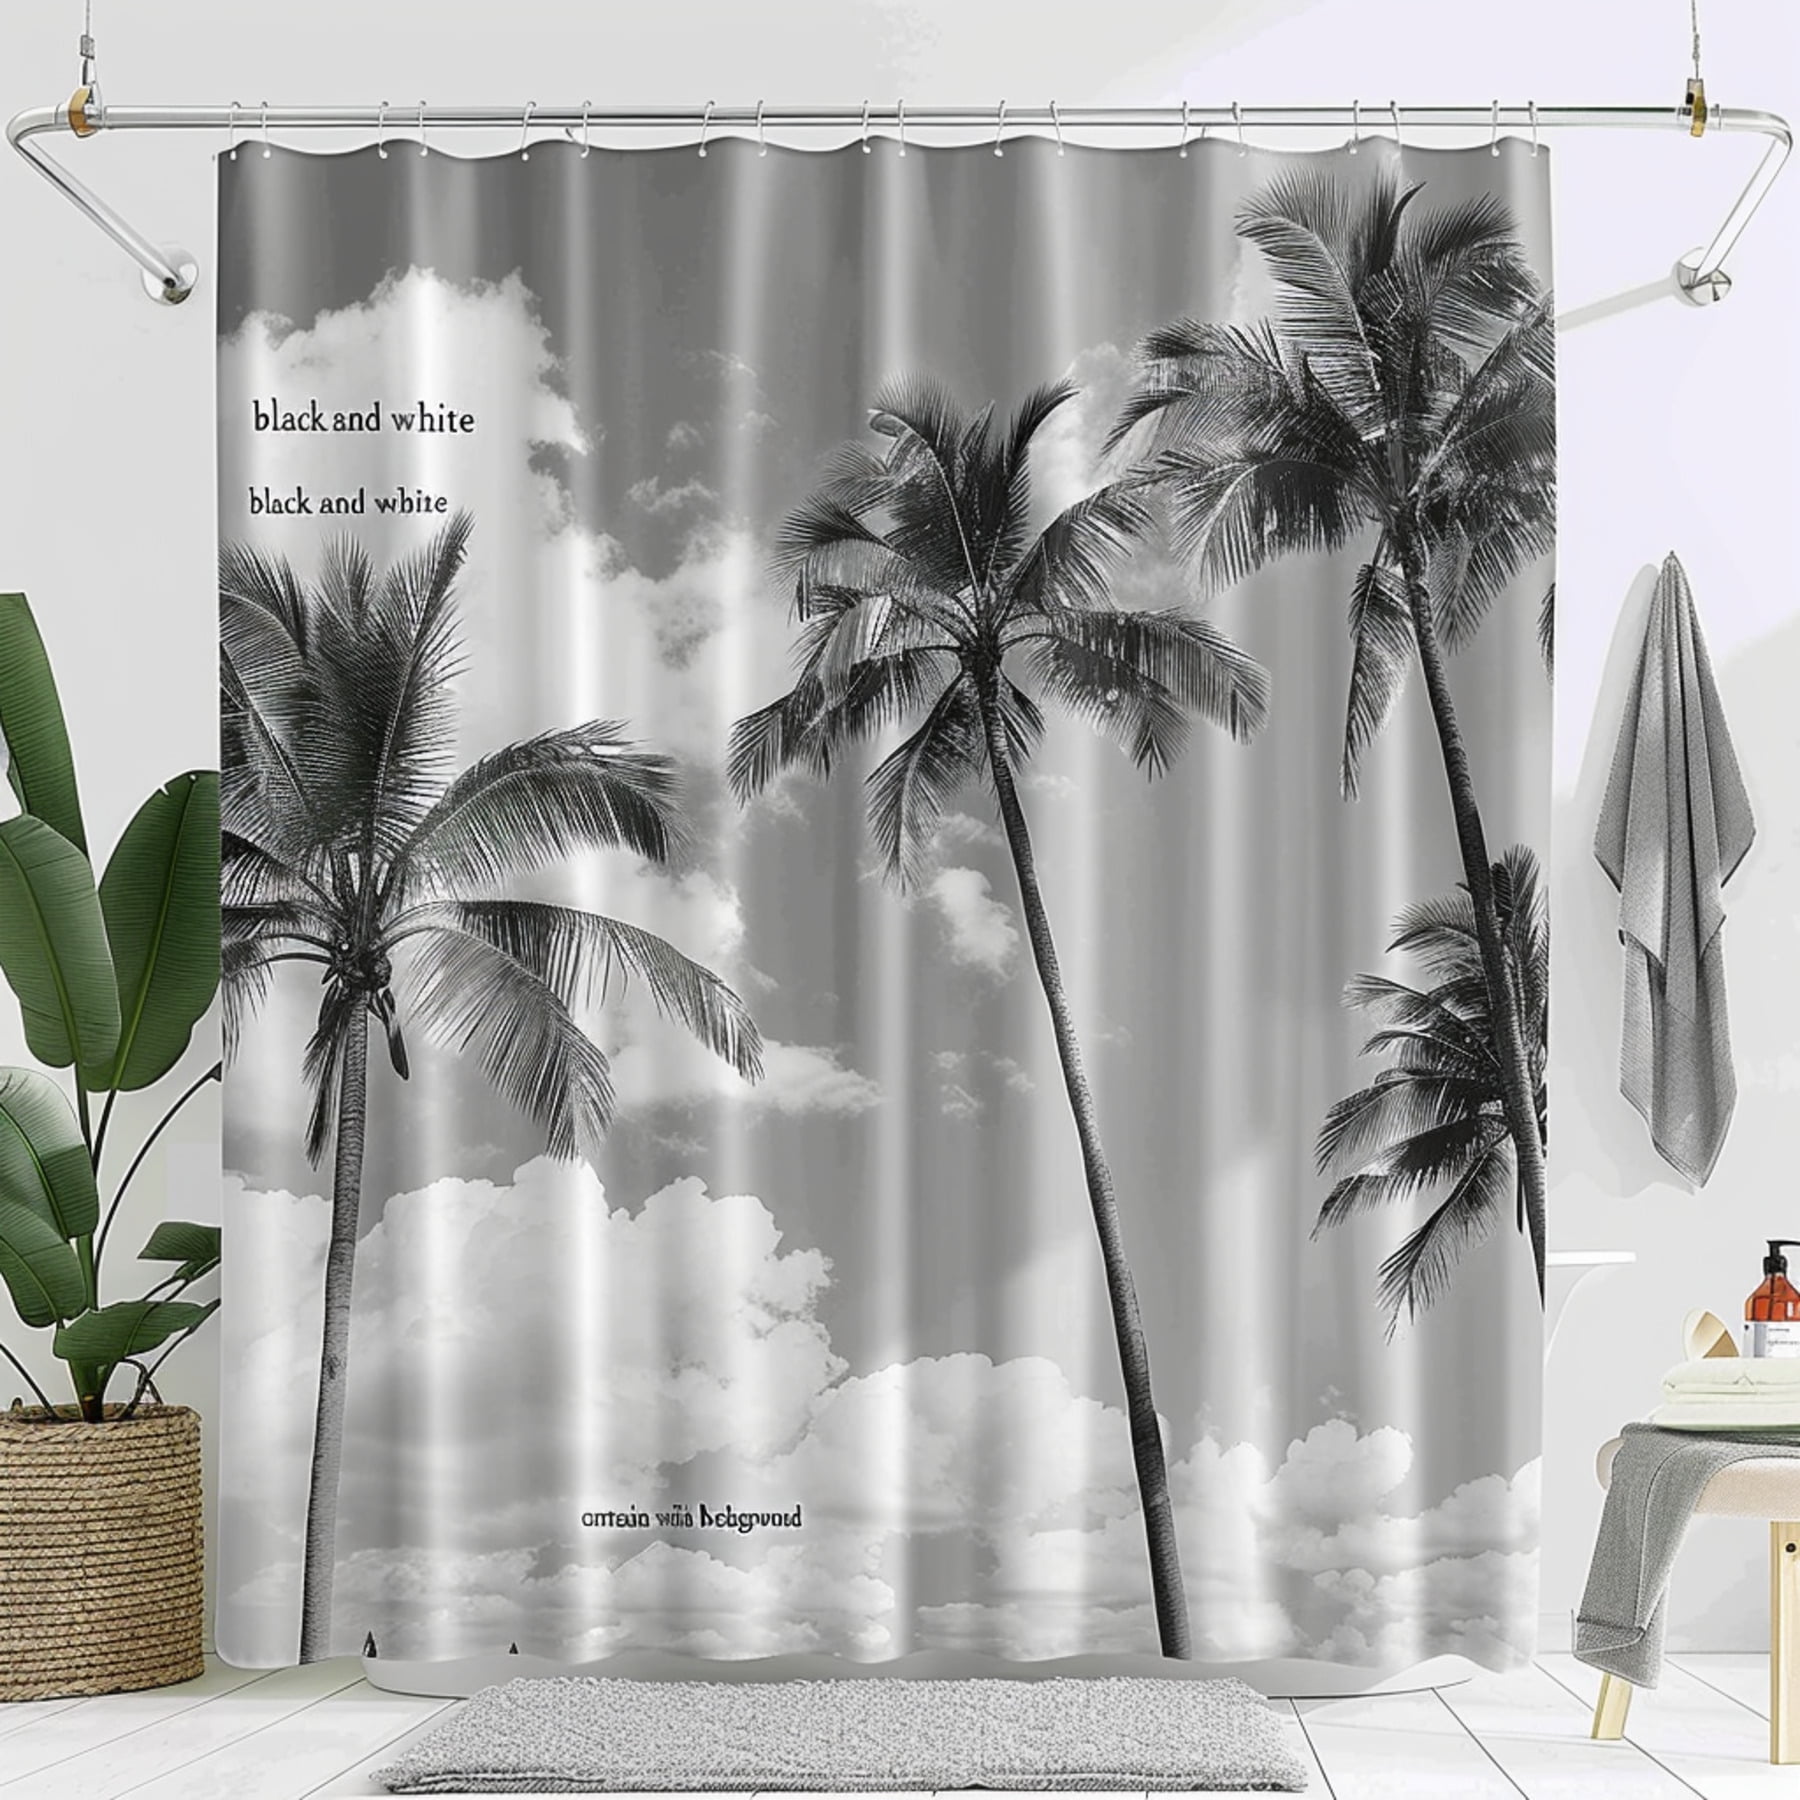 Black and White Palm Tree Bathroom Curtain with Sky Background Shower ...